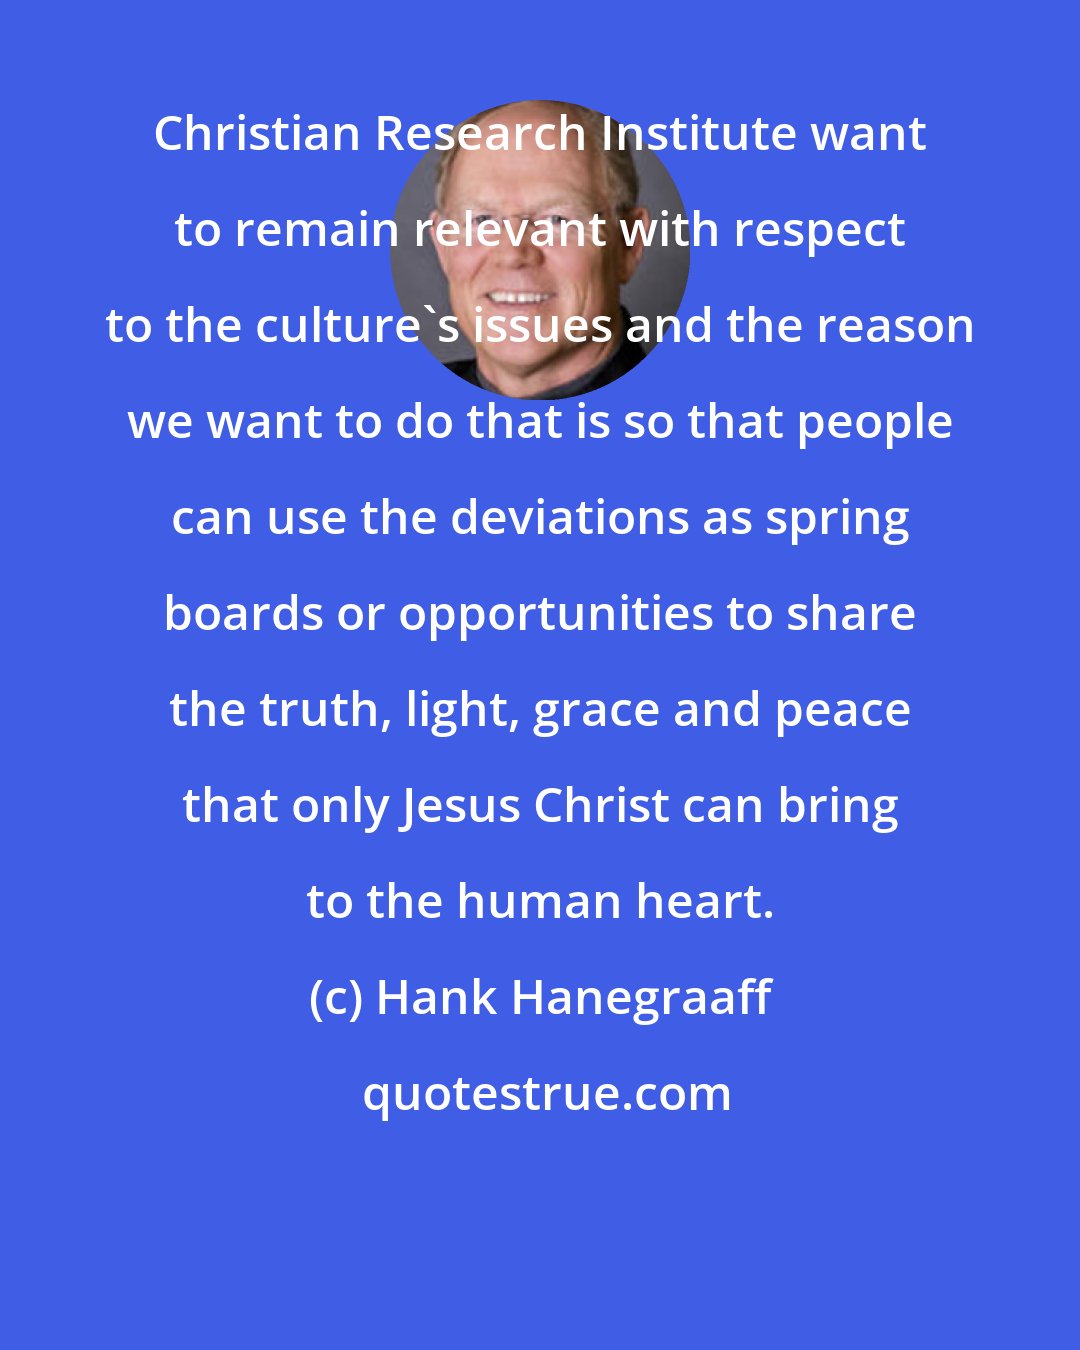 Hank Hanegraaff: Christian Research Institute want to remain relevant with respect to the culture's issues and the reason we want to do that is so that people can use the deviations as spring boards or opportunities to share the truth, light, grace and peace that only Jesus Christ can bring to the human heart.